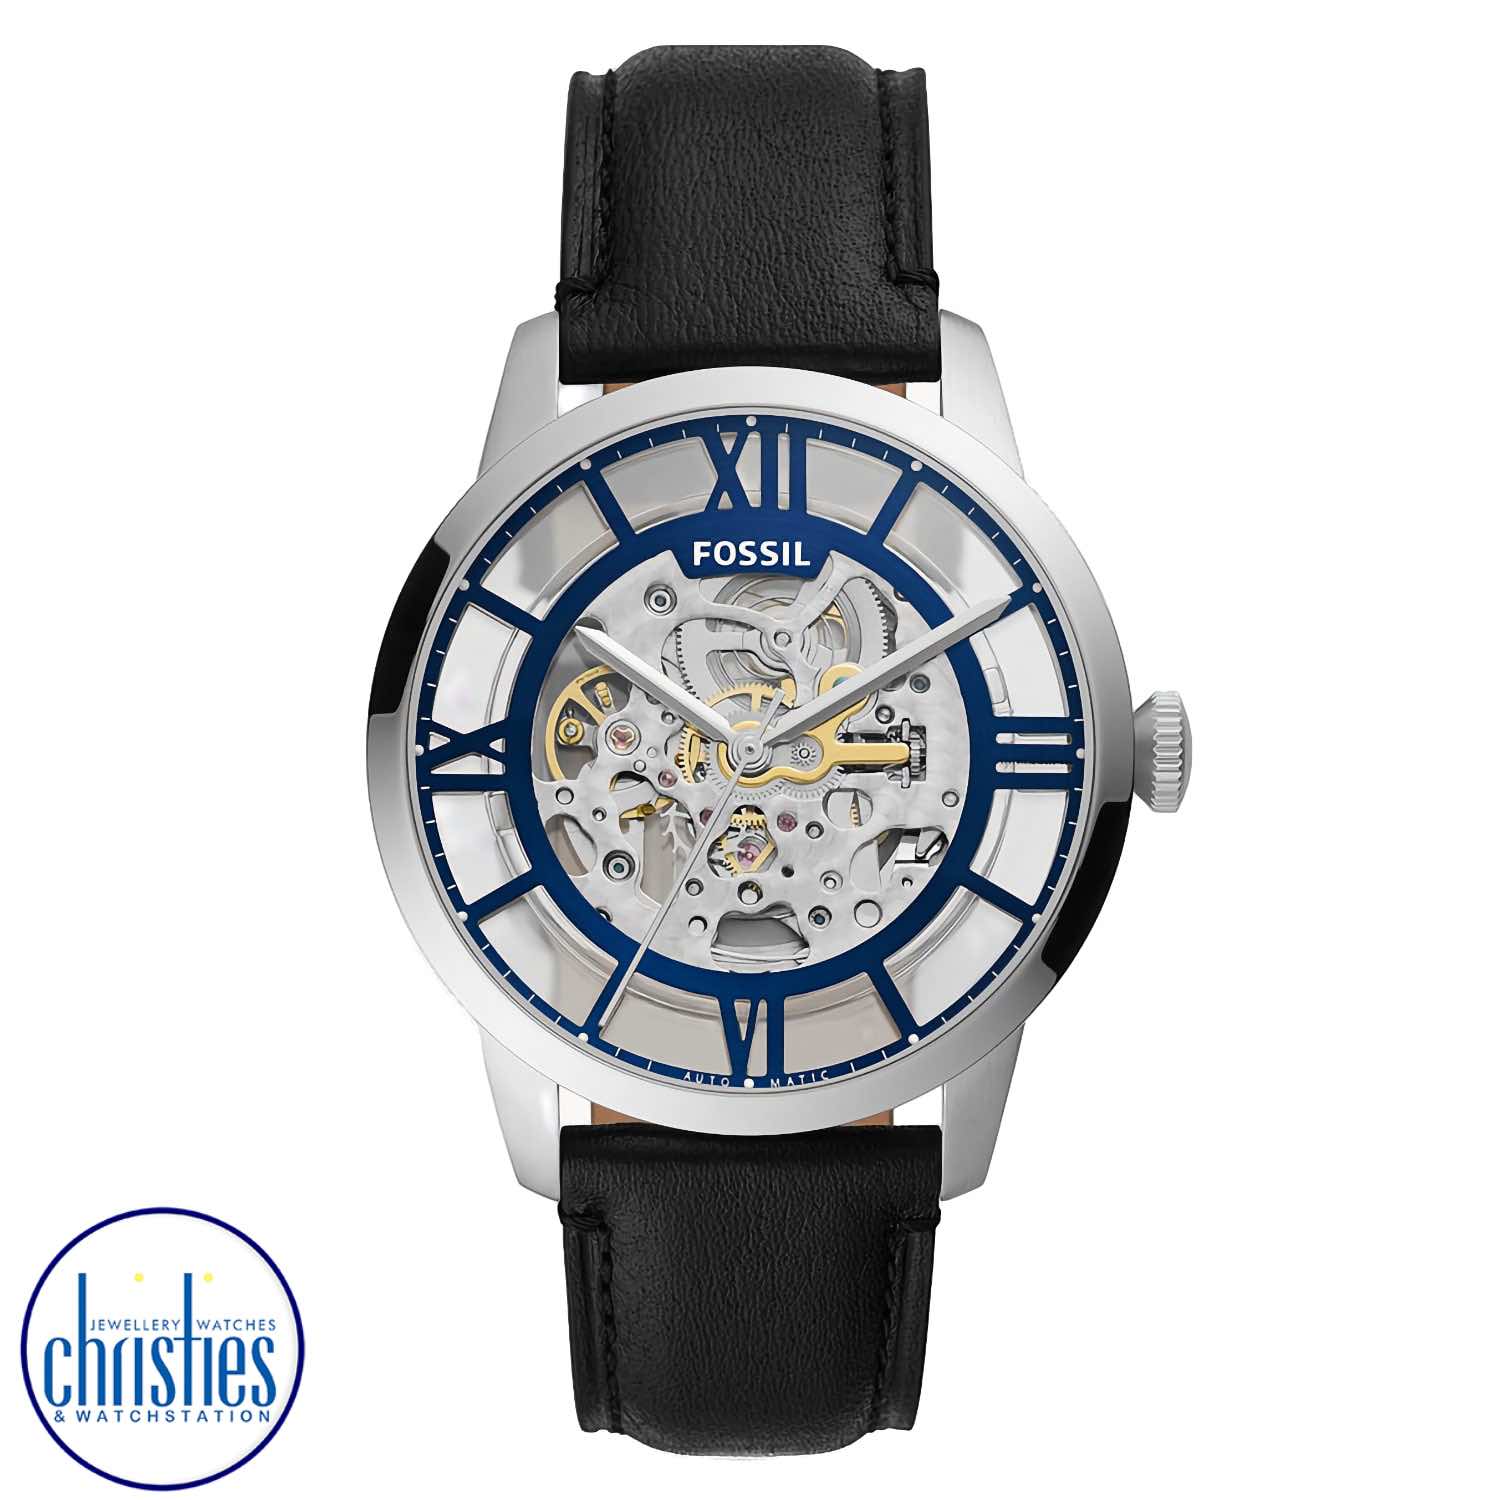 ME3205 Fossil Townsman Automatic Black Leather Watch. ME3205 Fossil Townsman Automatic Black Leather WatchAfterpay - Split your purchase into 4 instalments - Pay for your purchase over 4 instalments, due every two weeks.